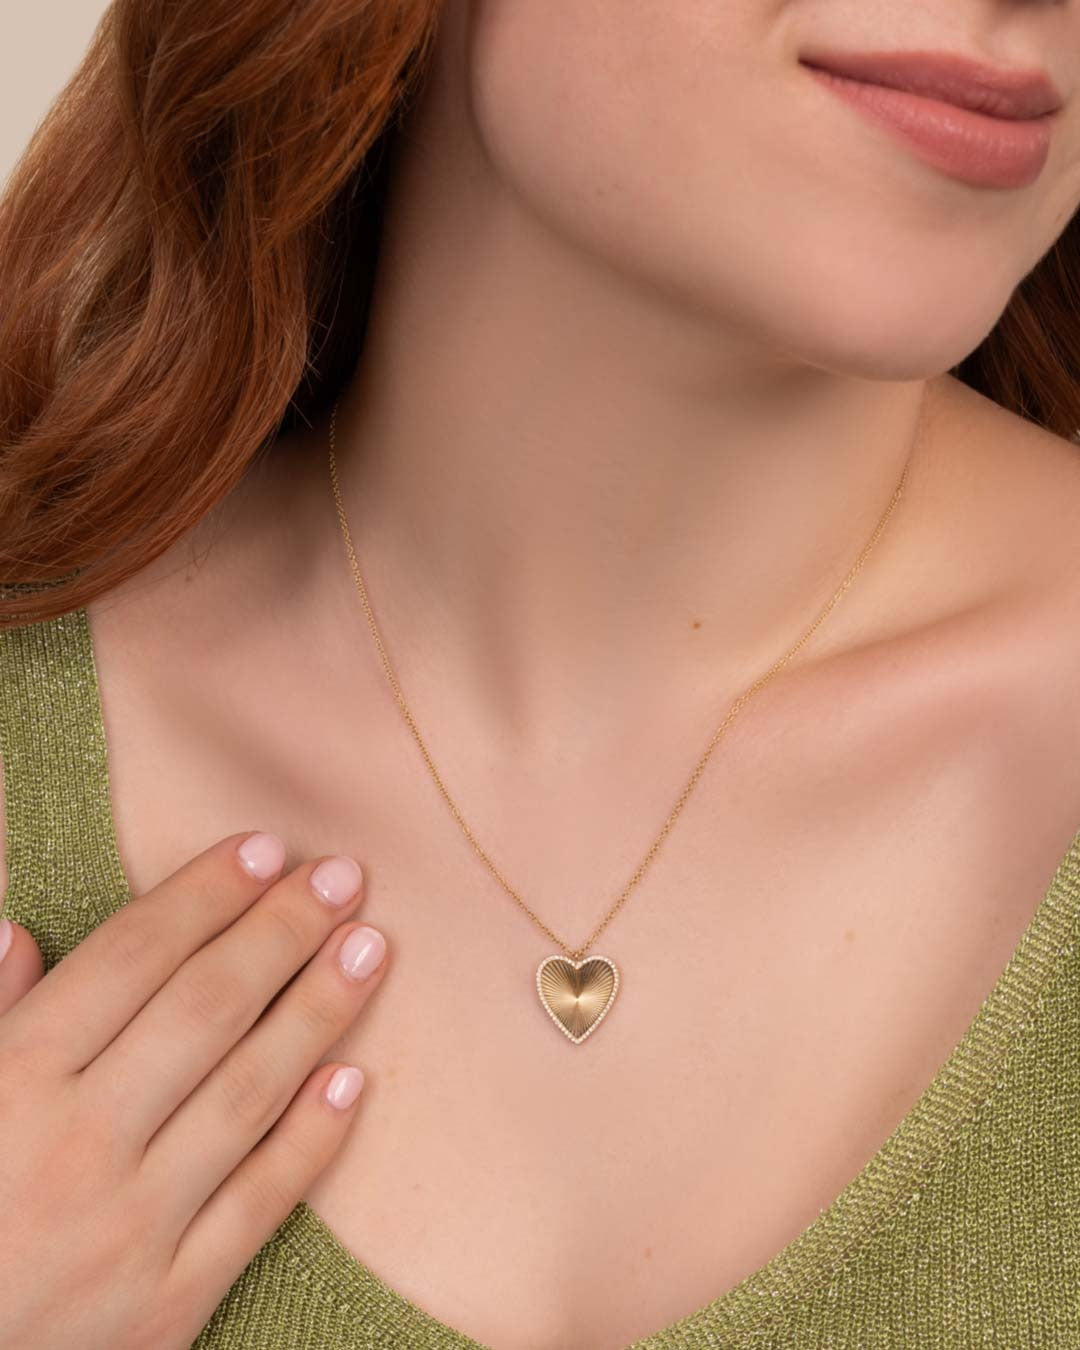 14K GOLD HEART CHARM NECKLACE